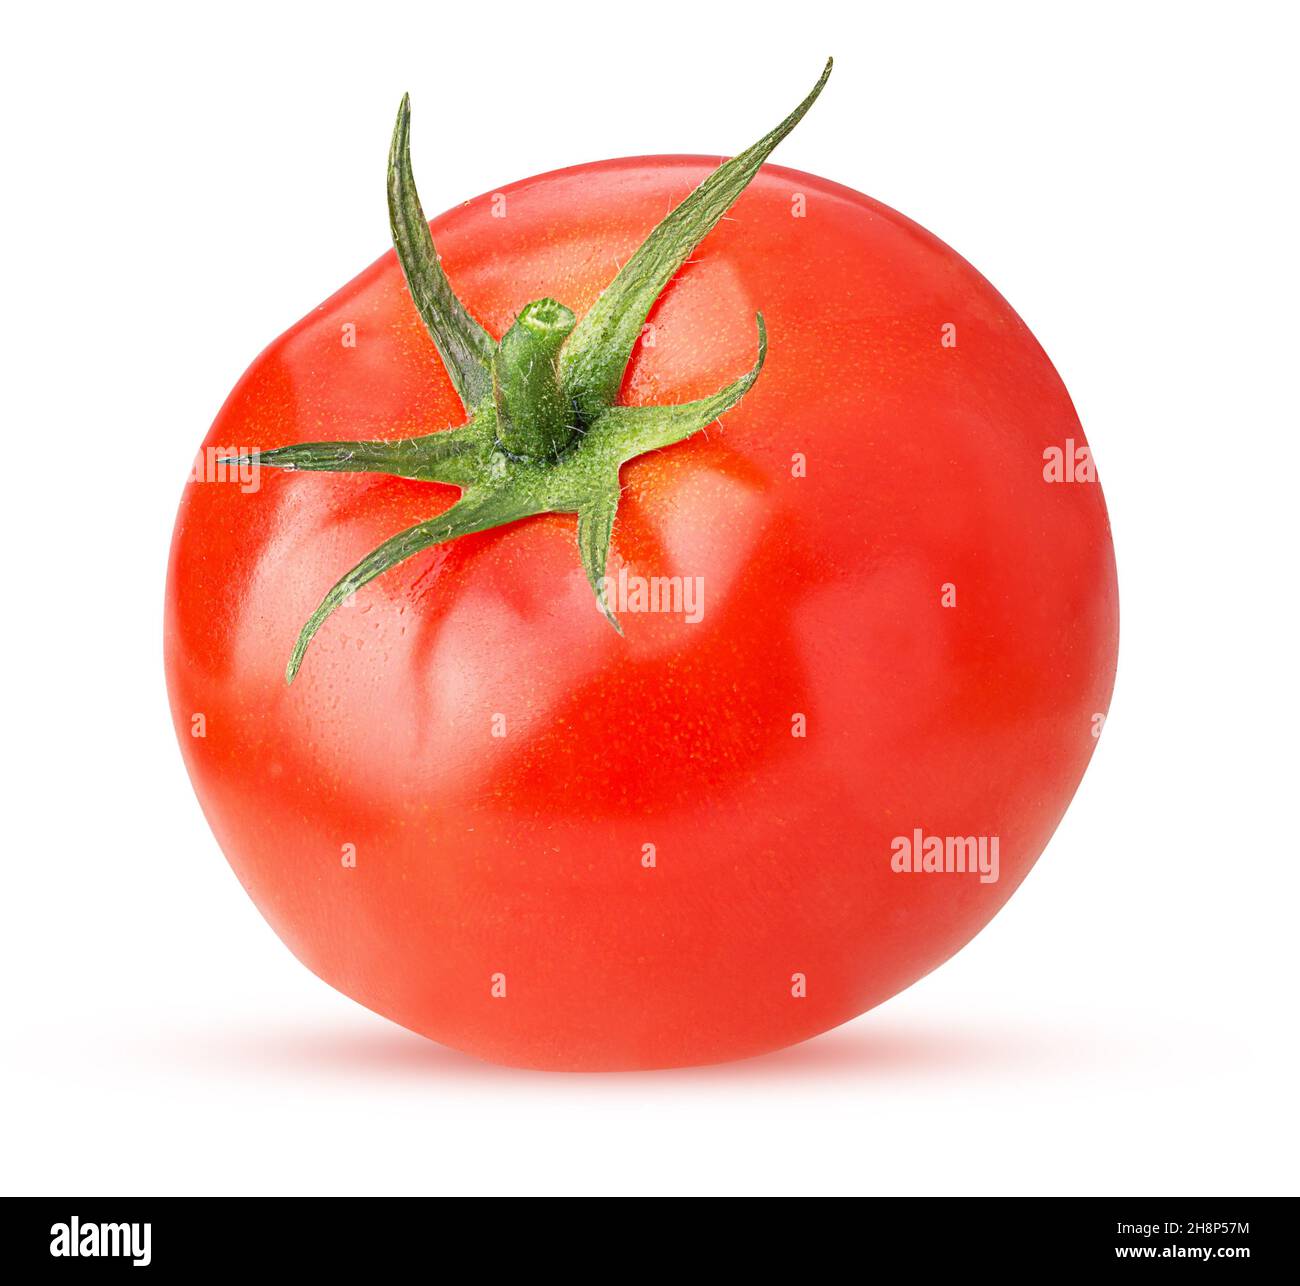 Fresh red tomato with green leaves isolated on white background Clipping Path. Full depth of field. Stock Photo